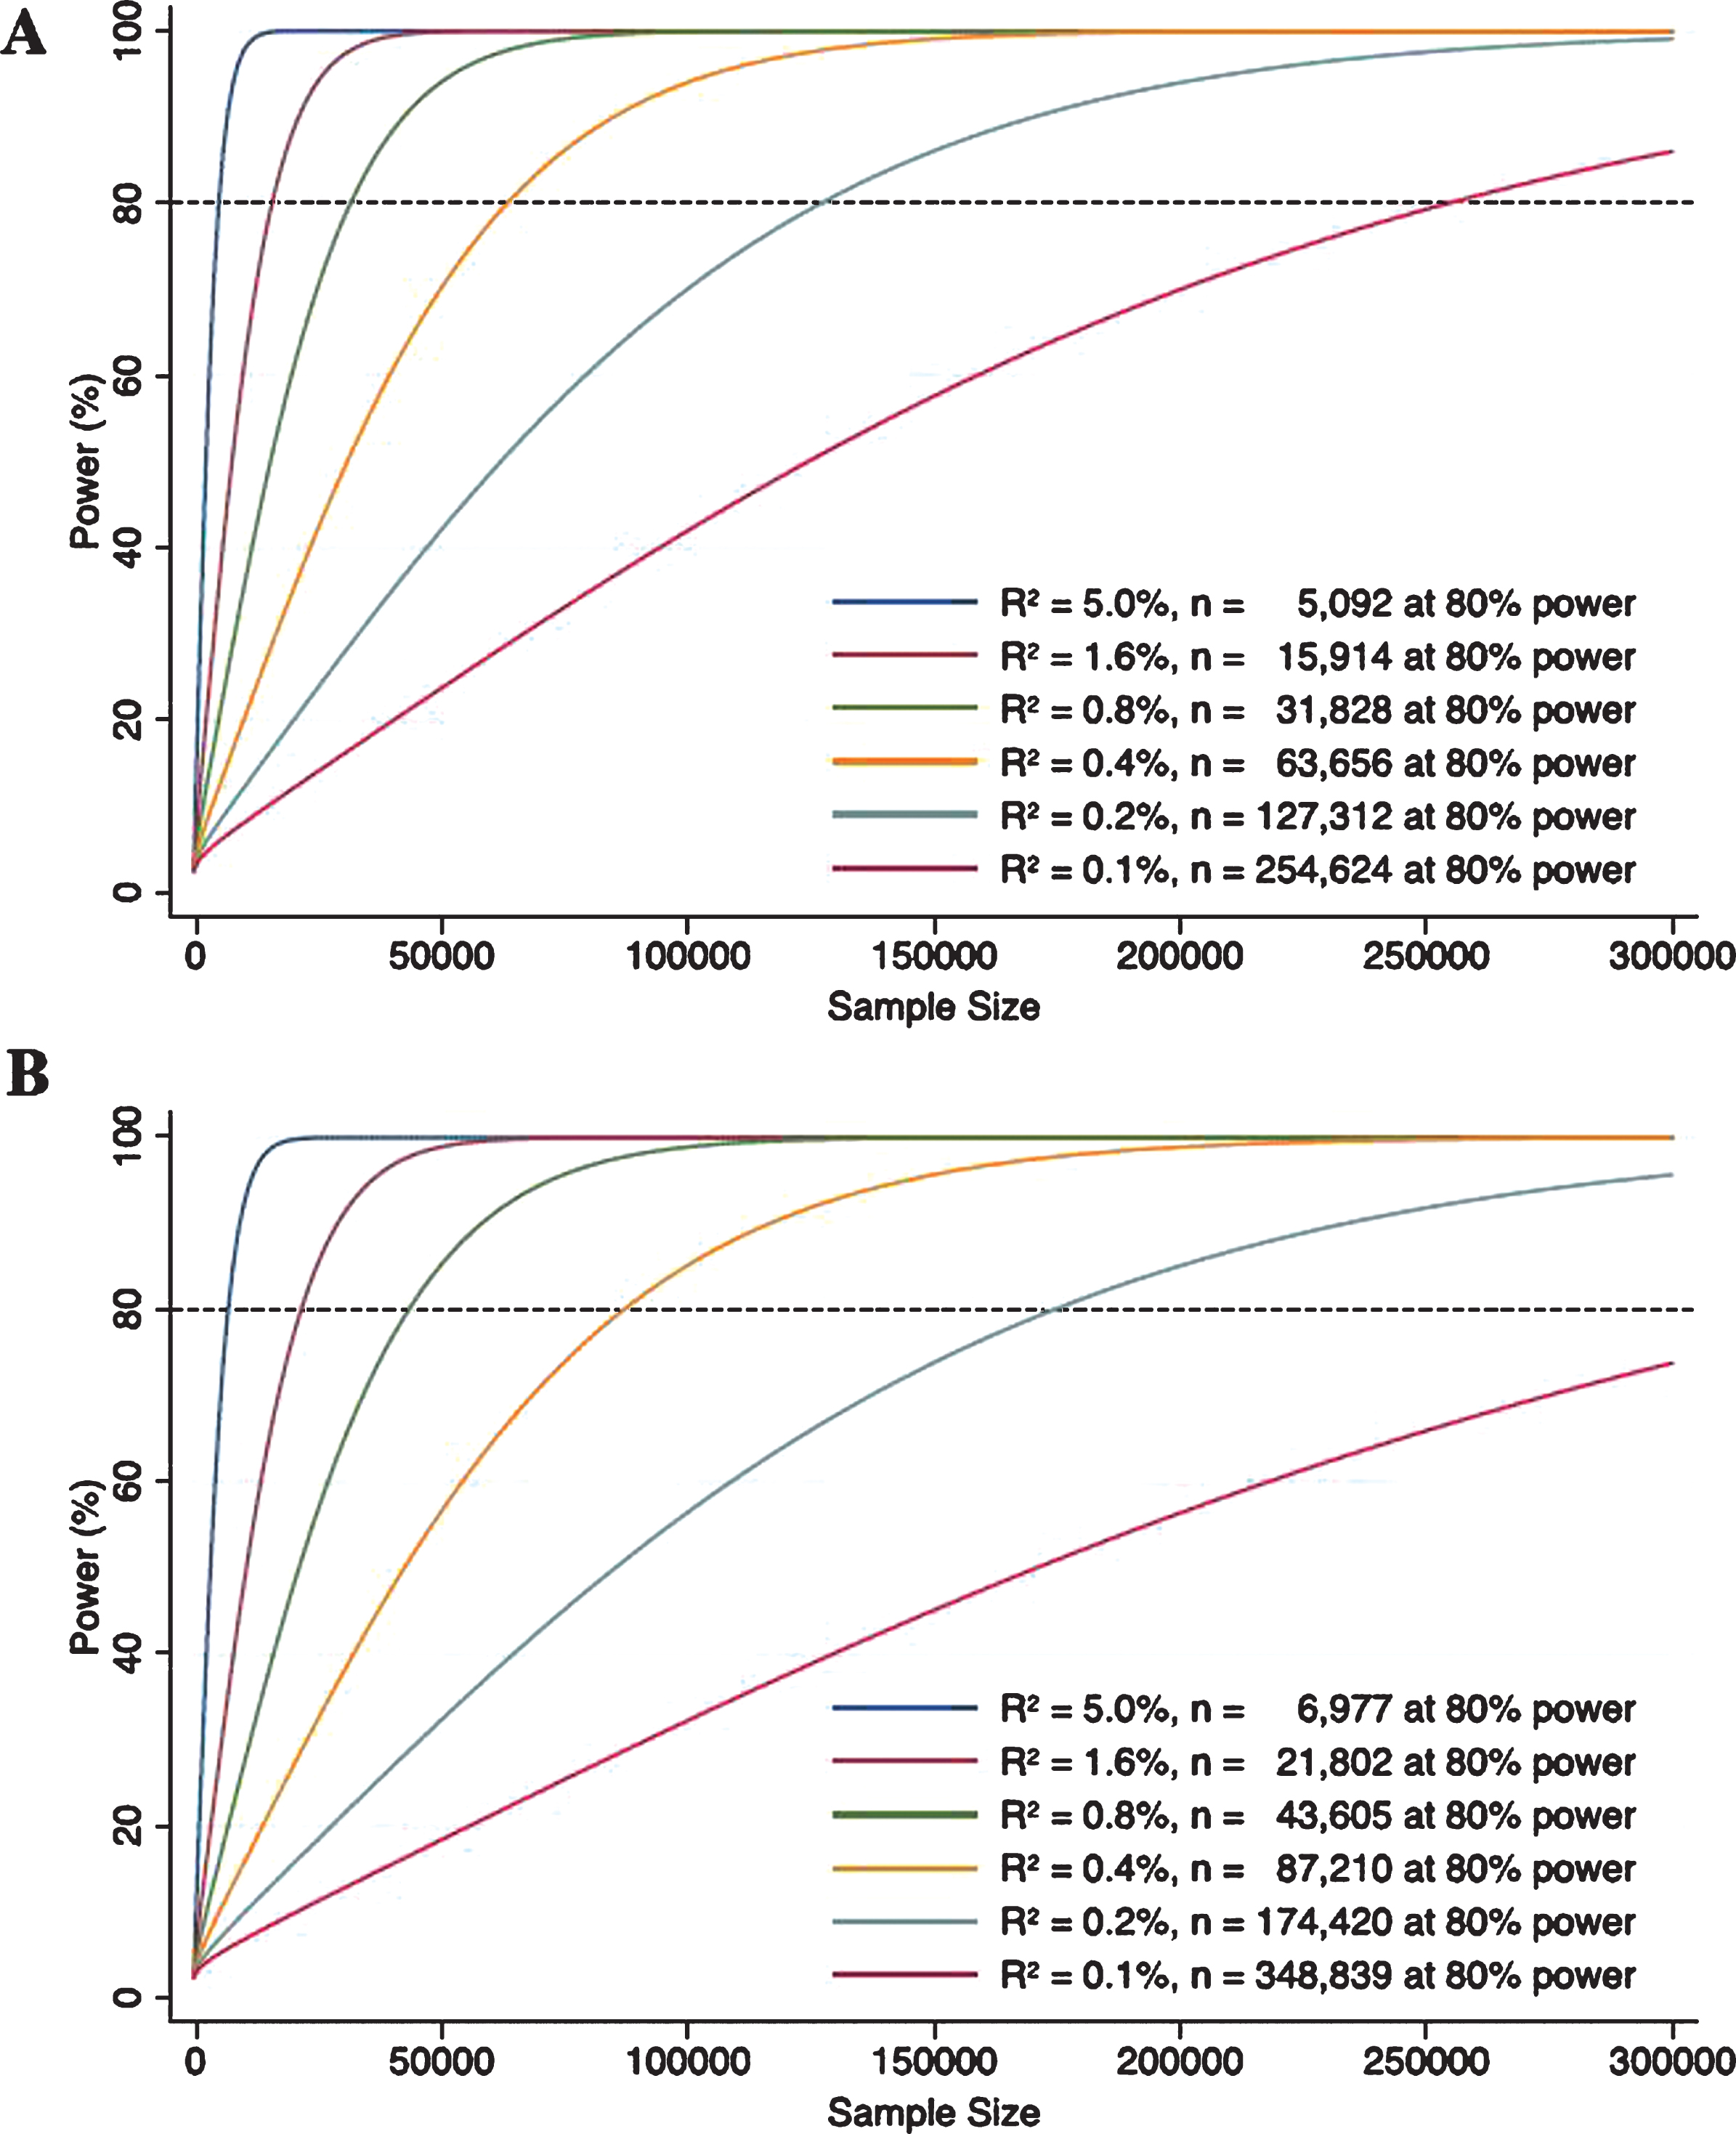 Power curves for genetic instruments with R2 of 0.1%, 0.2%, 0.4%, 0.8%, 1.6%, and 5.0% when outcomes are binary (A) and continuous (B). The power functions were taken from Burgess [46]. For binary outcomes, two-sided type 1 error, effect size (in odds ratio for 1 standard deviation (SD) increase in the exposure), and case to control ratio were set to be 0.05, 1.5, and 1 : 3, respectively. For continuous outcomes, two-sided type 1 error and effect size (in SD for 1 SD increase in the exposure) were set to be 0.05 and 0.15, respectively.